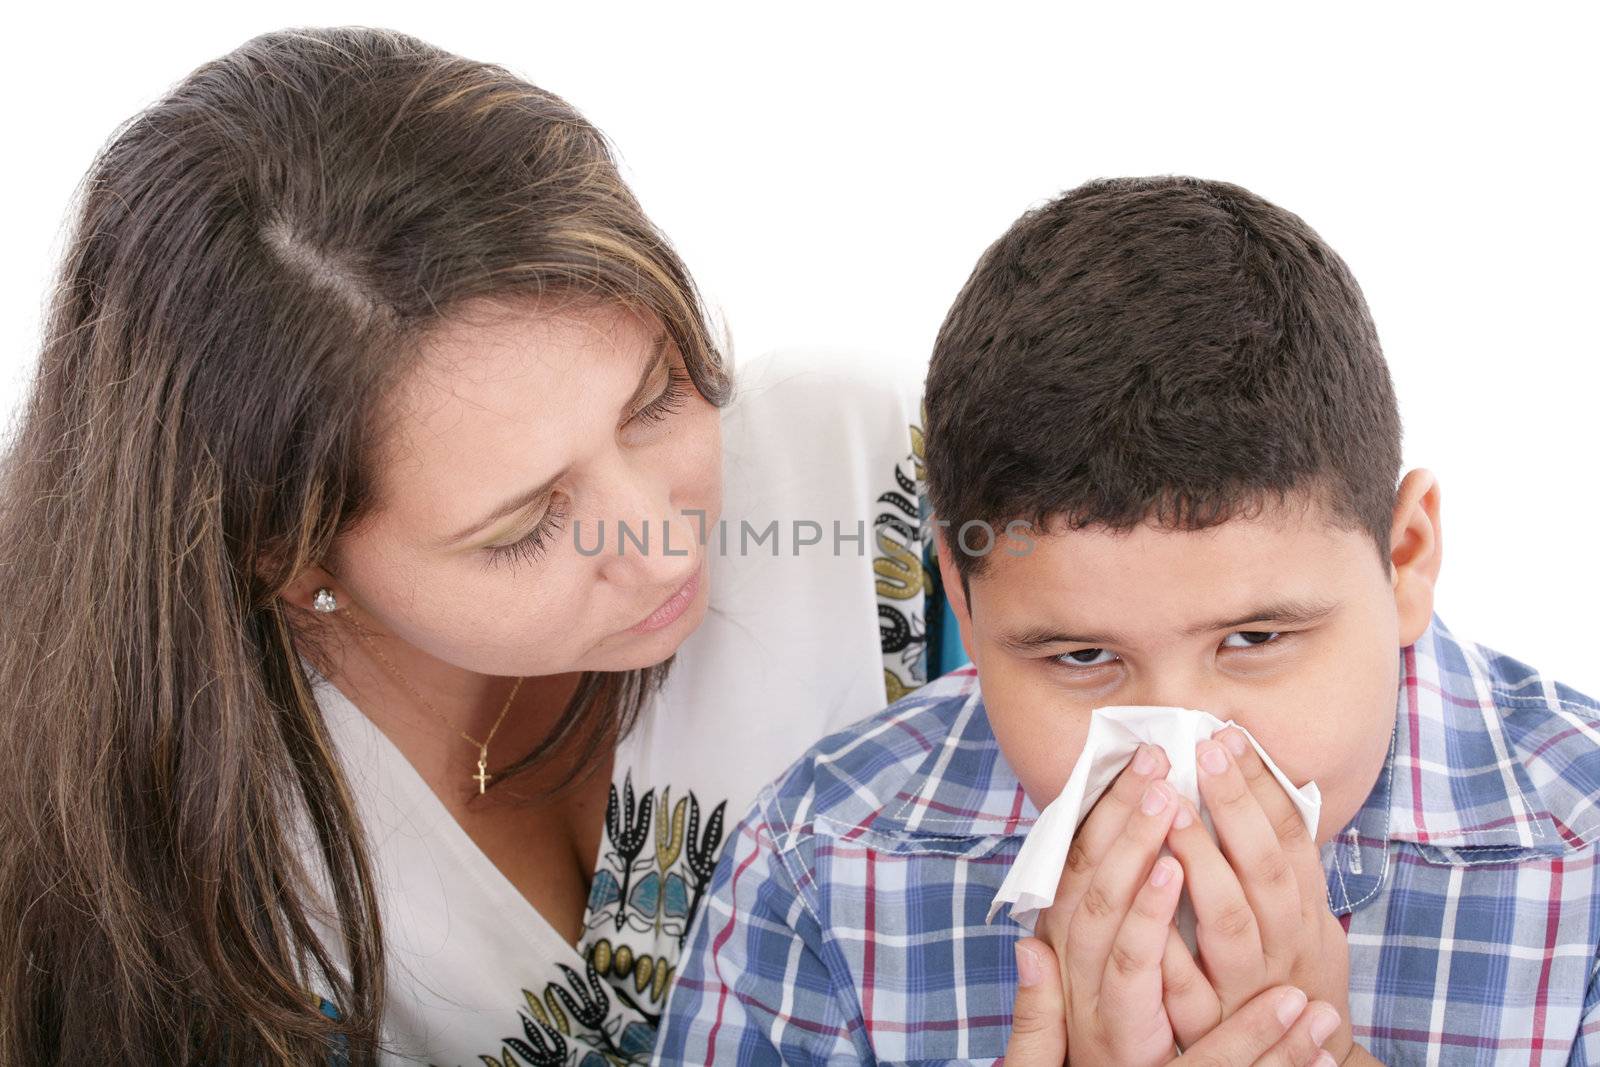 Child blowing nose. Child with tissue. catarrh or allergy